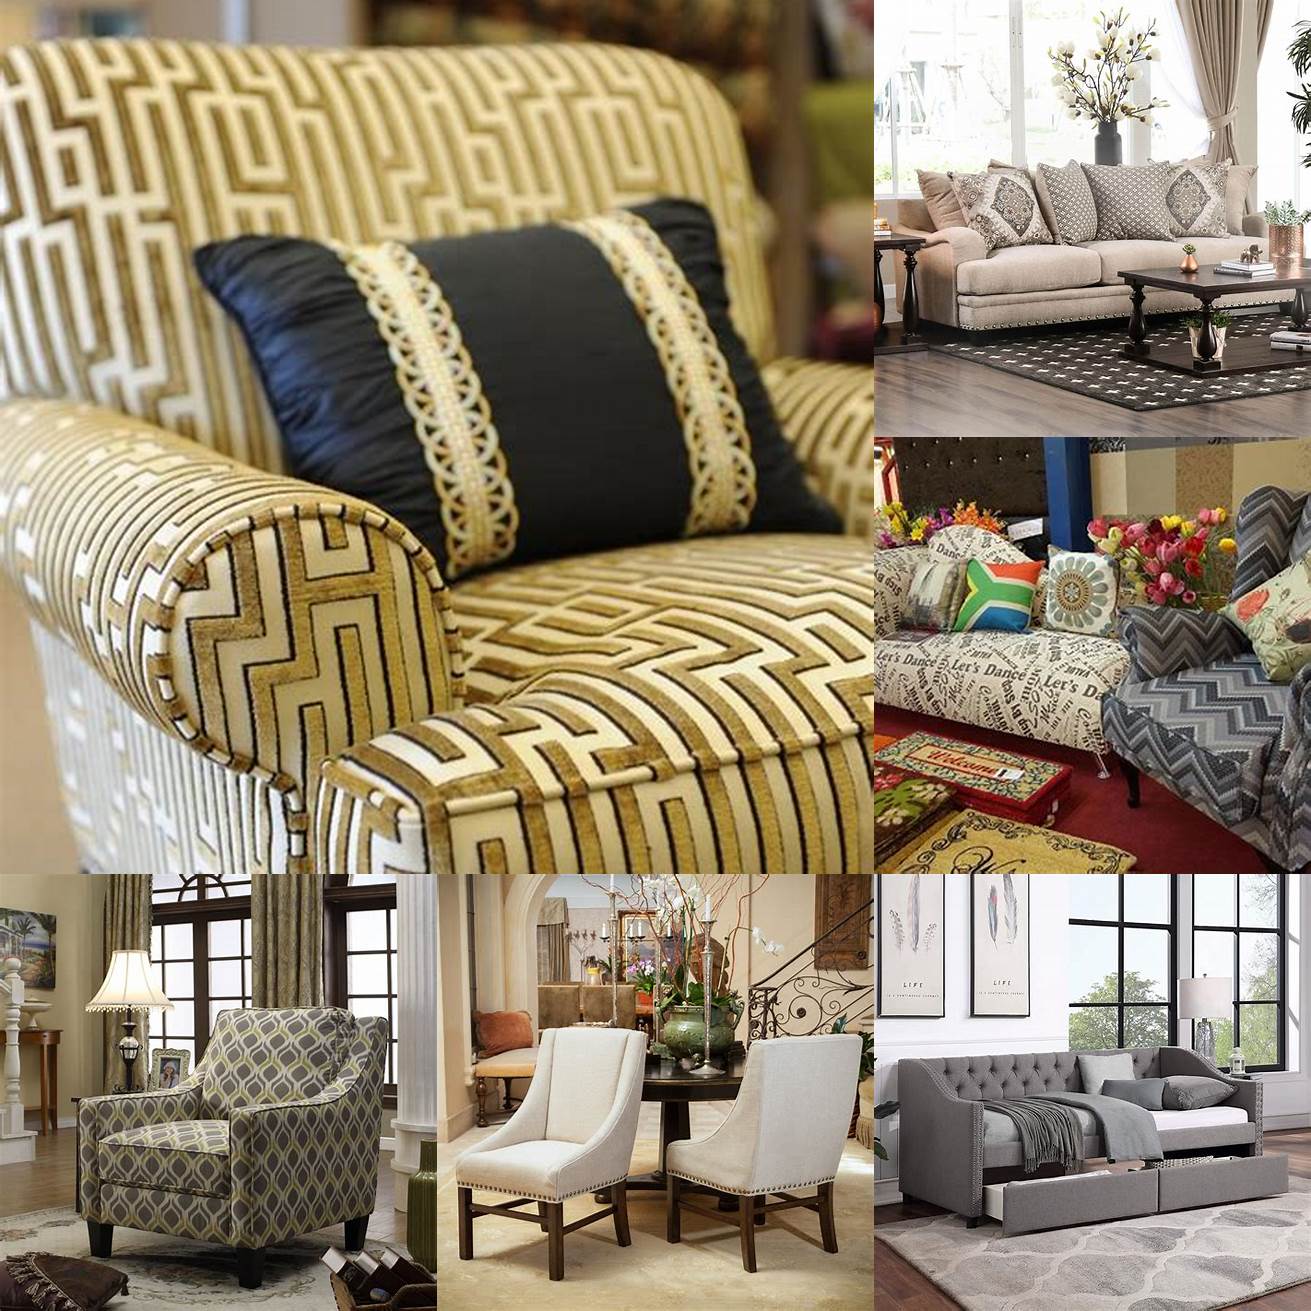 2 Can be expensive especially if upholstered in high-end fabrics